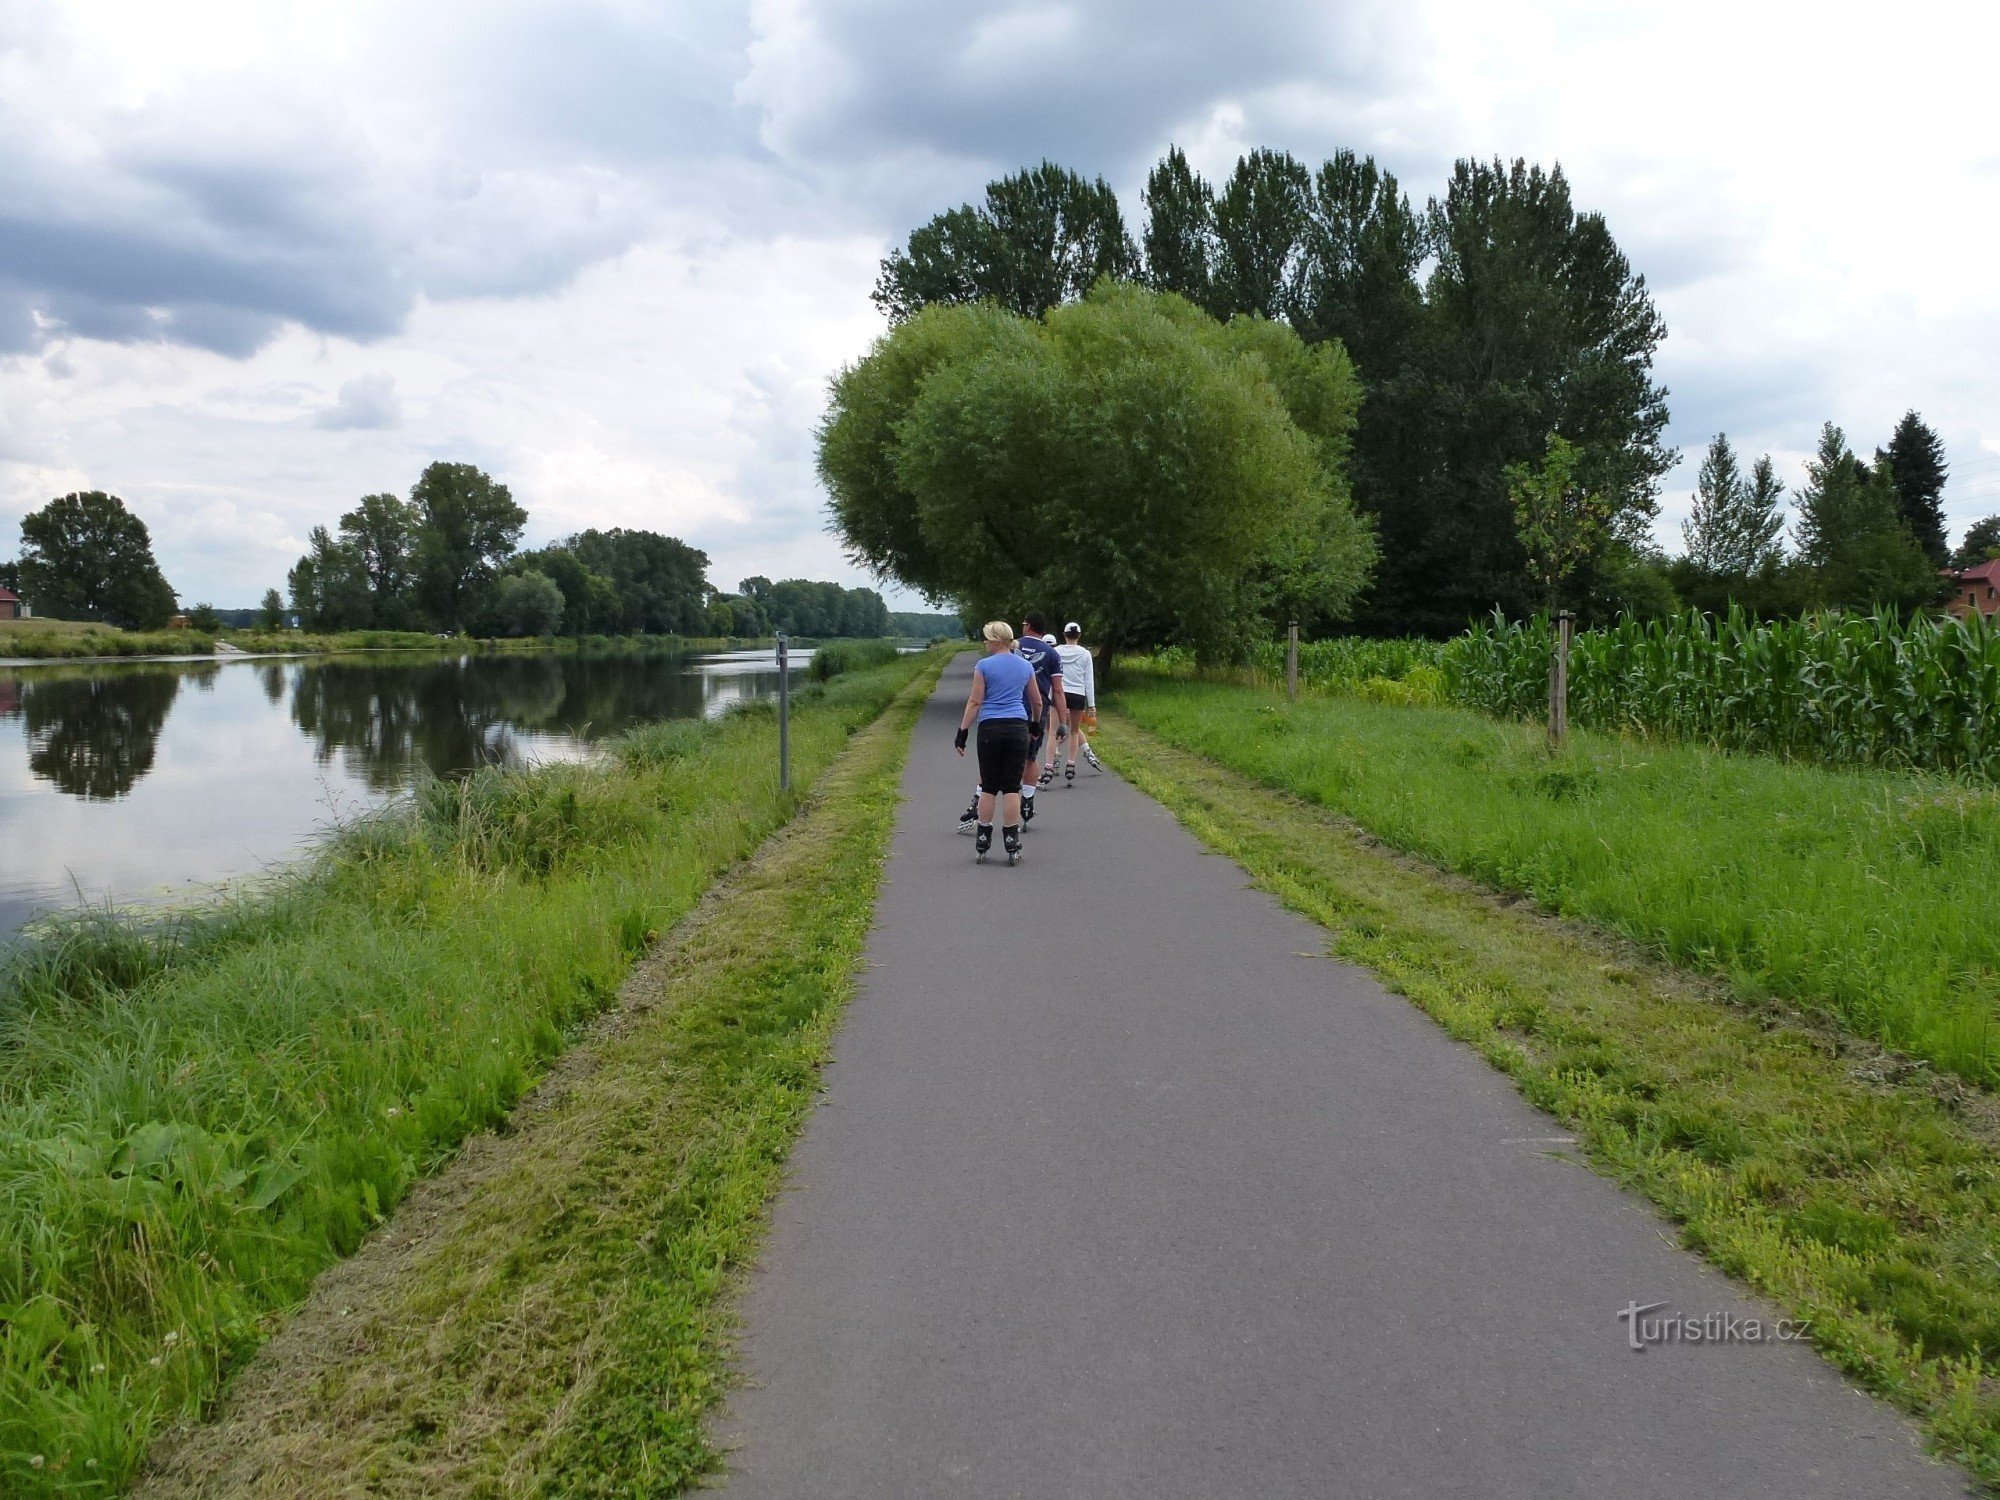 Skaters' paradise near the Elbe on the 0019 cycle path